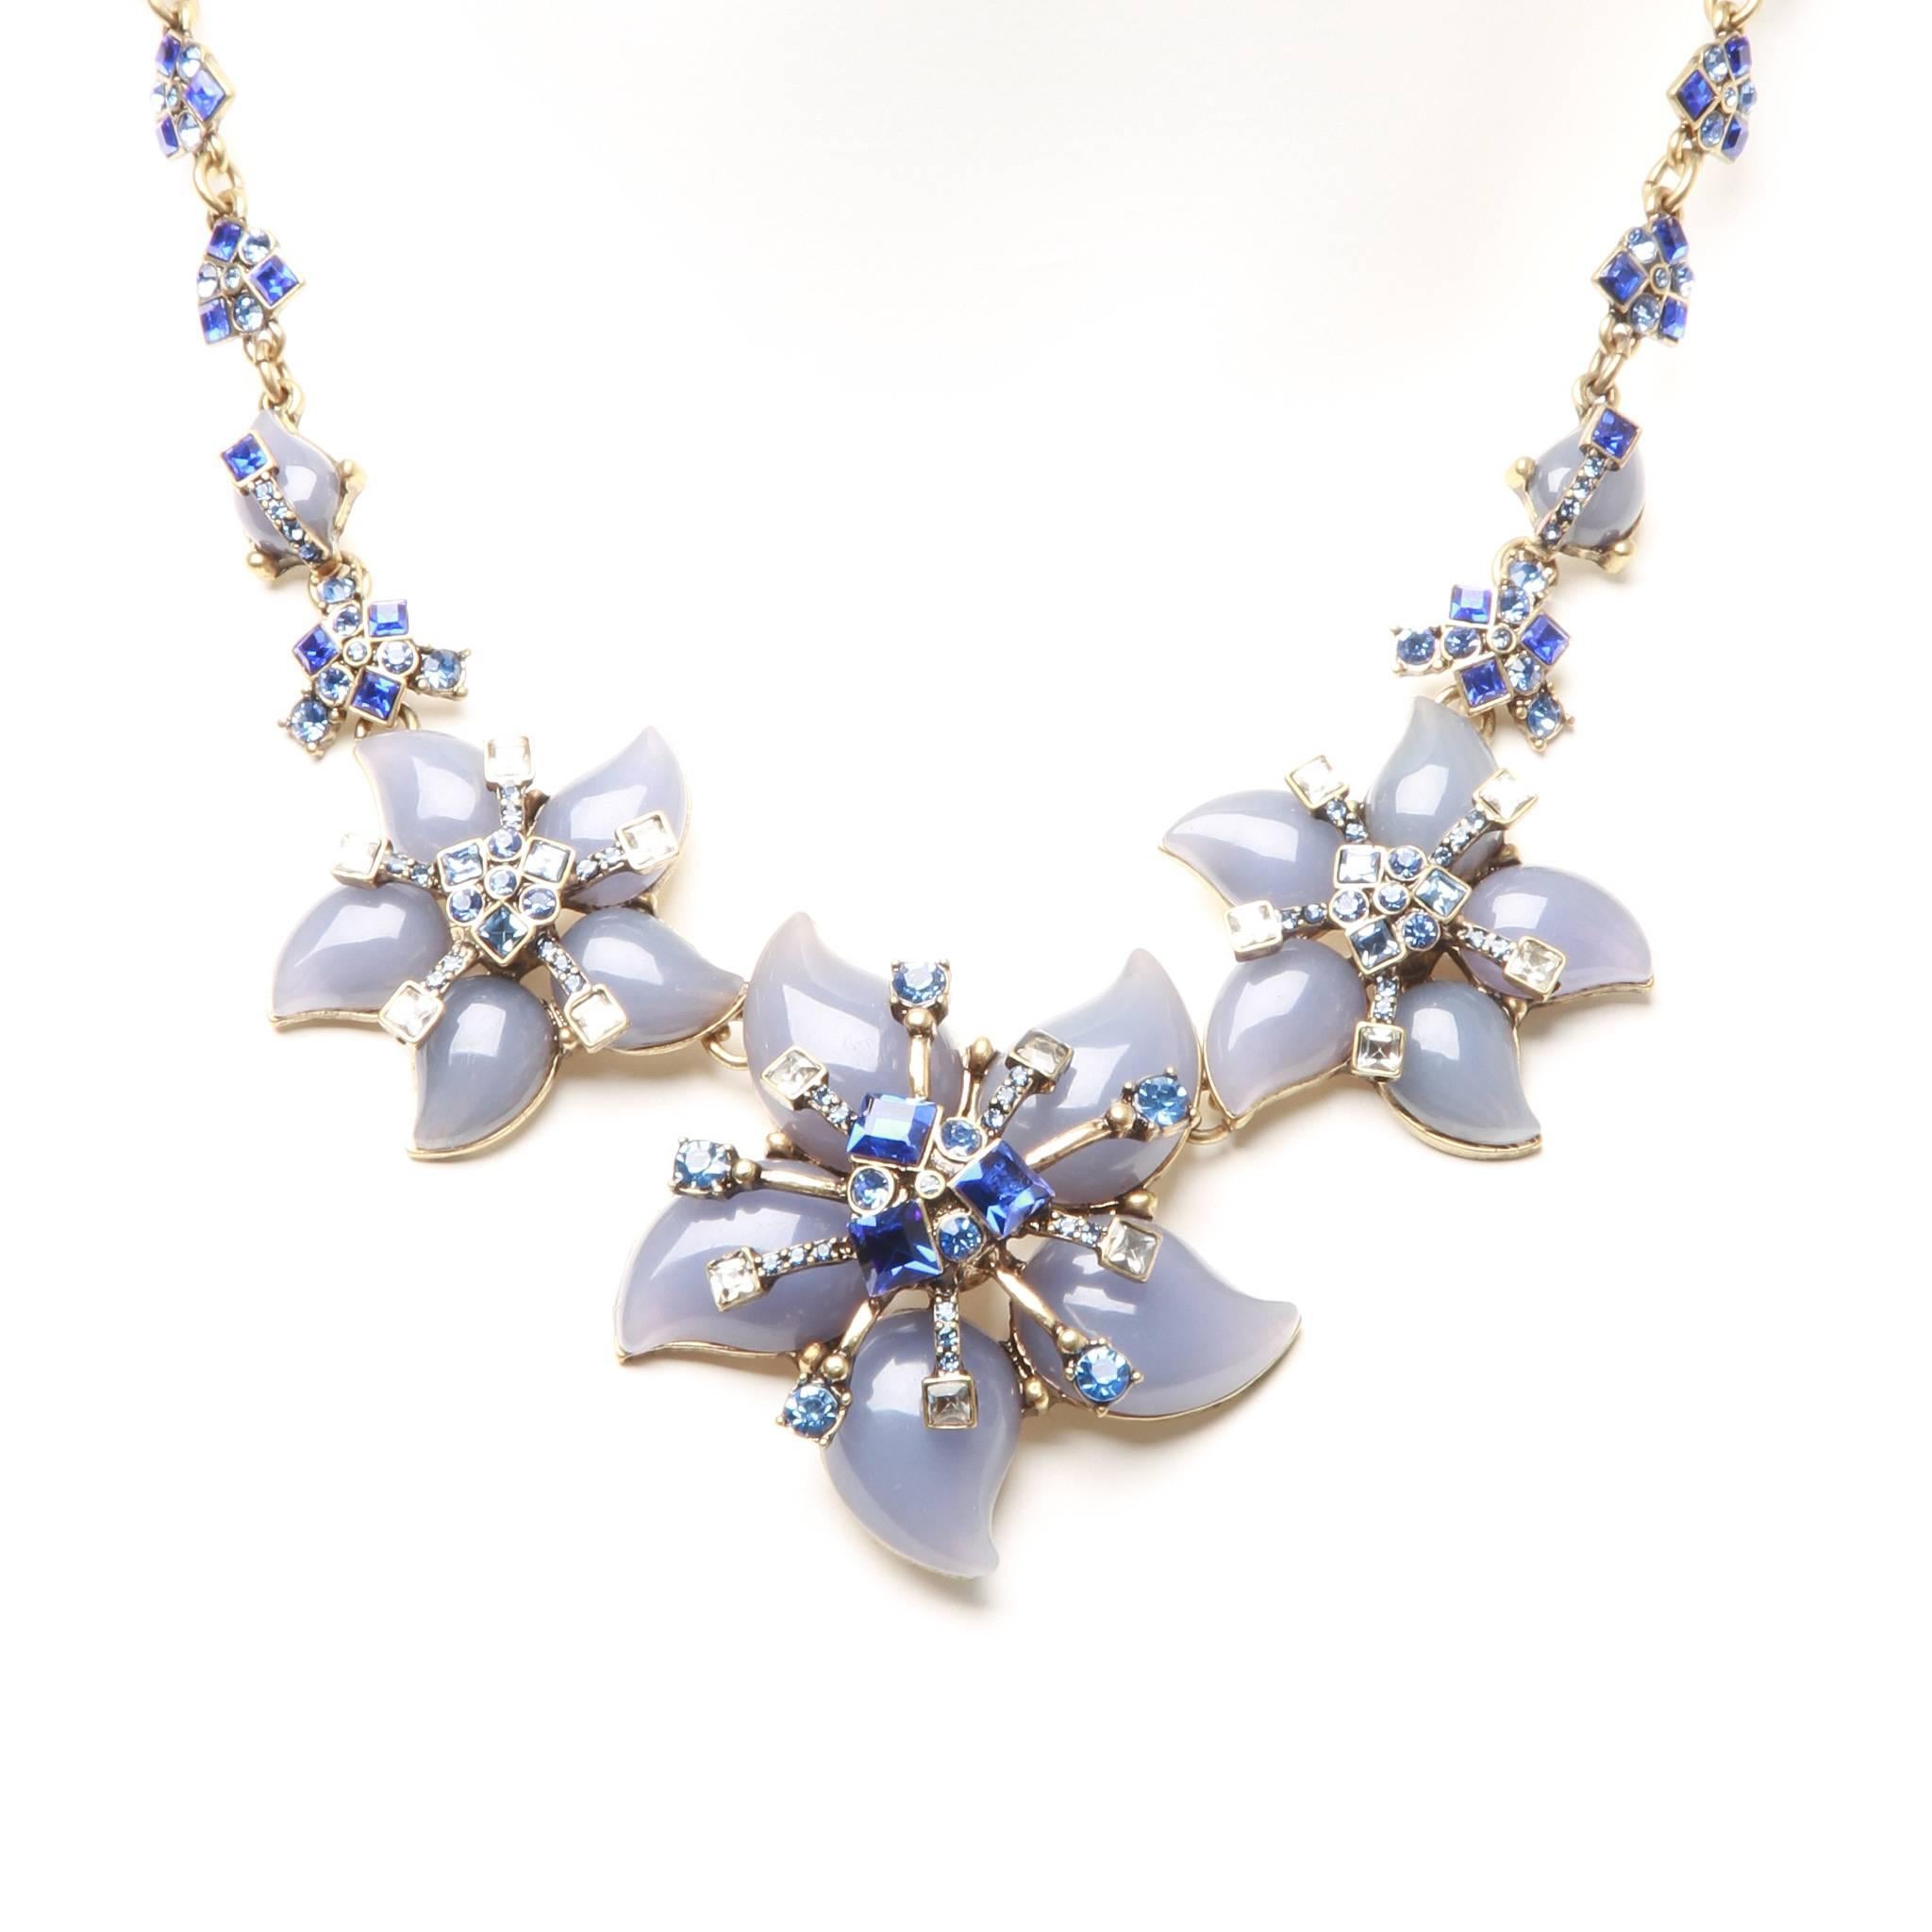 A gorgeous vintage Oscar de la Renta blue resin flower runway necklace, features blue resin flora and sparkling rhinestones throughout. Length of curb link chain at back for adjustability. 

Fastener: Lobster clasp